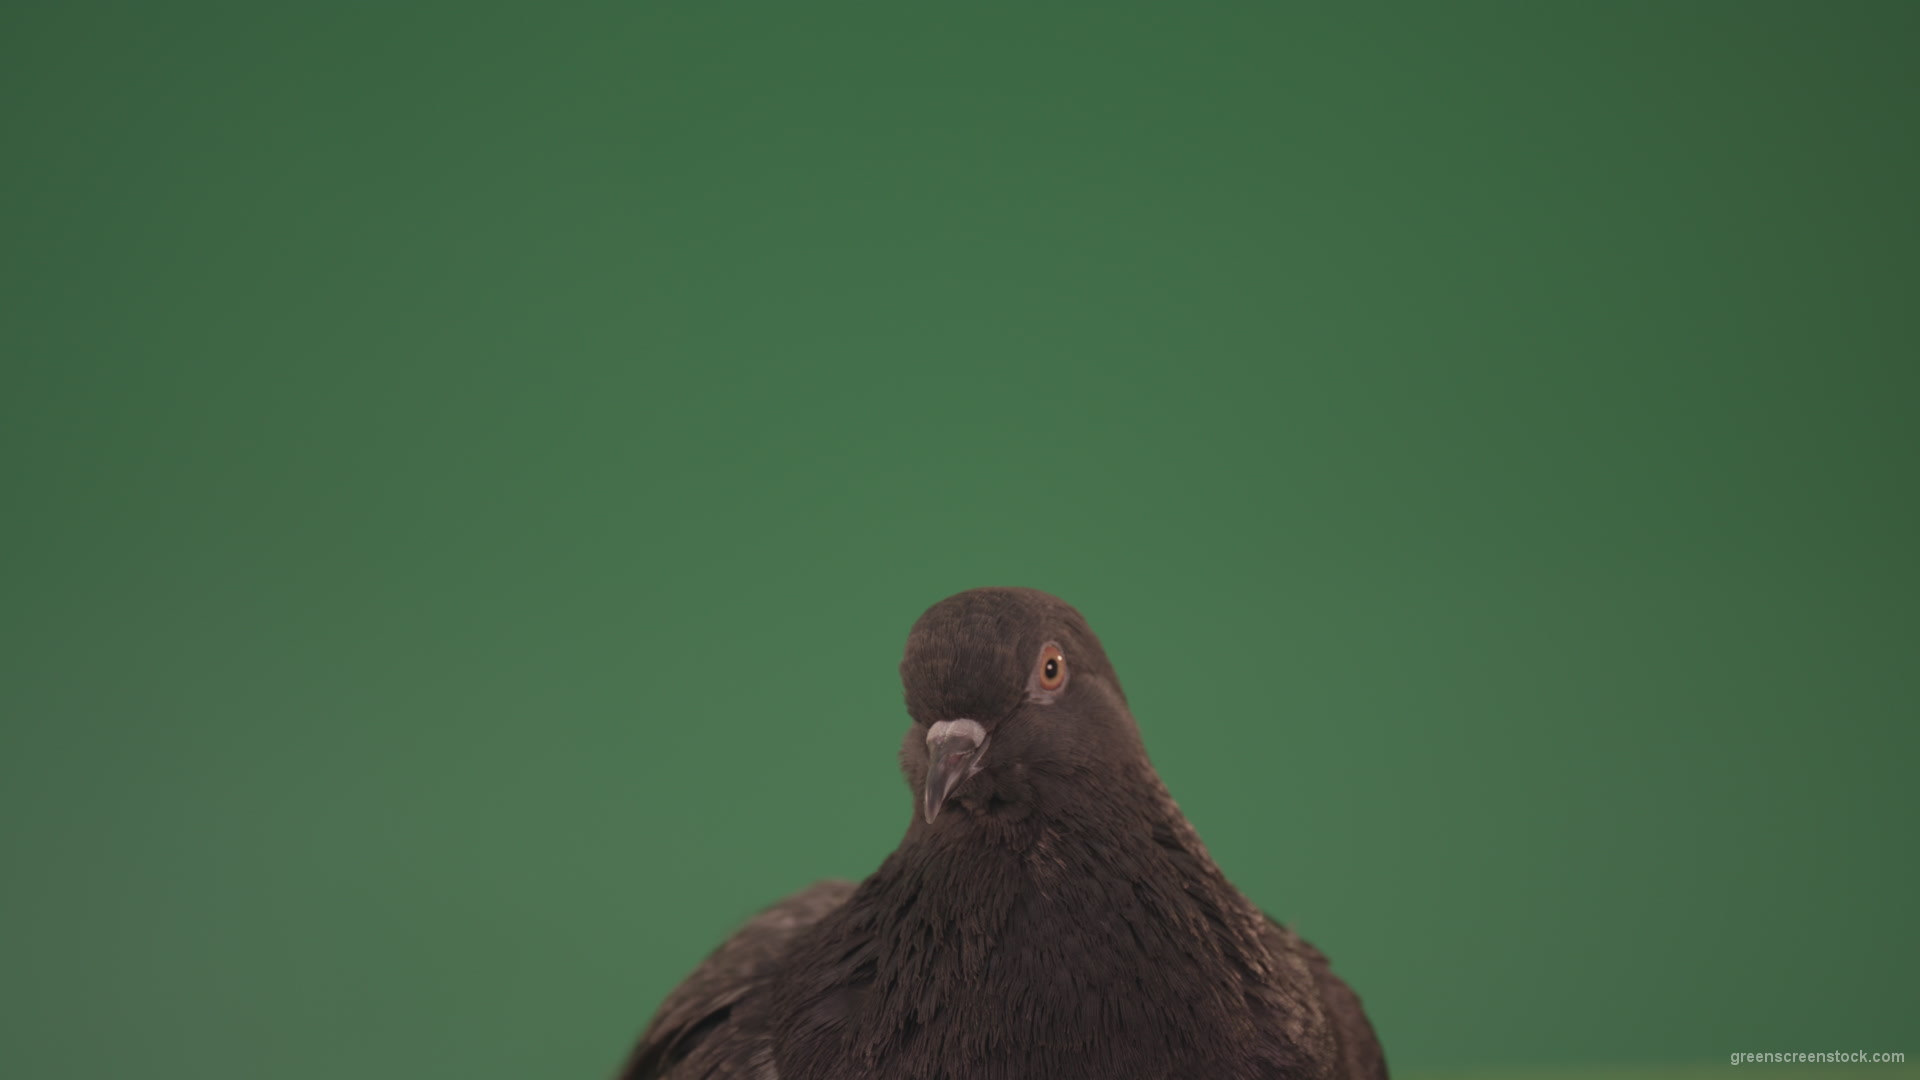 Pigeon-came-to-rest-after-a-long-flight-isolated-on-chromakey-background_009 Green Screen Stock